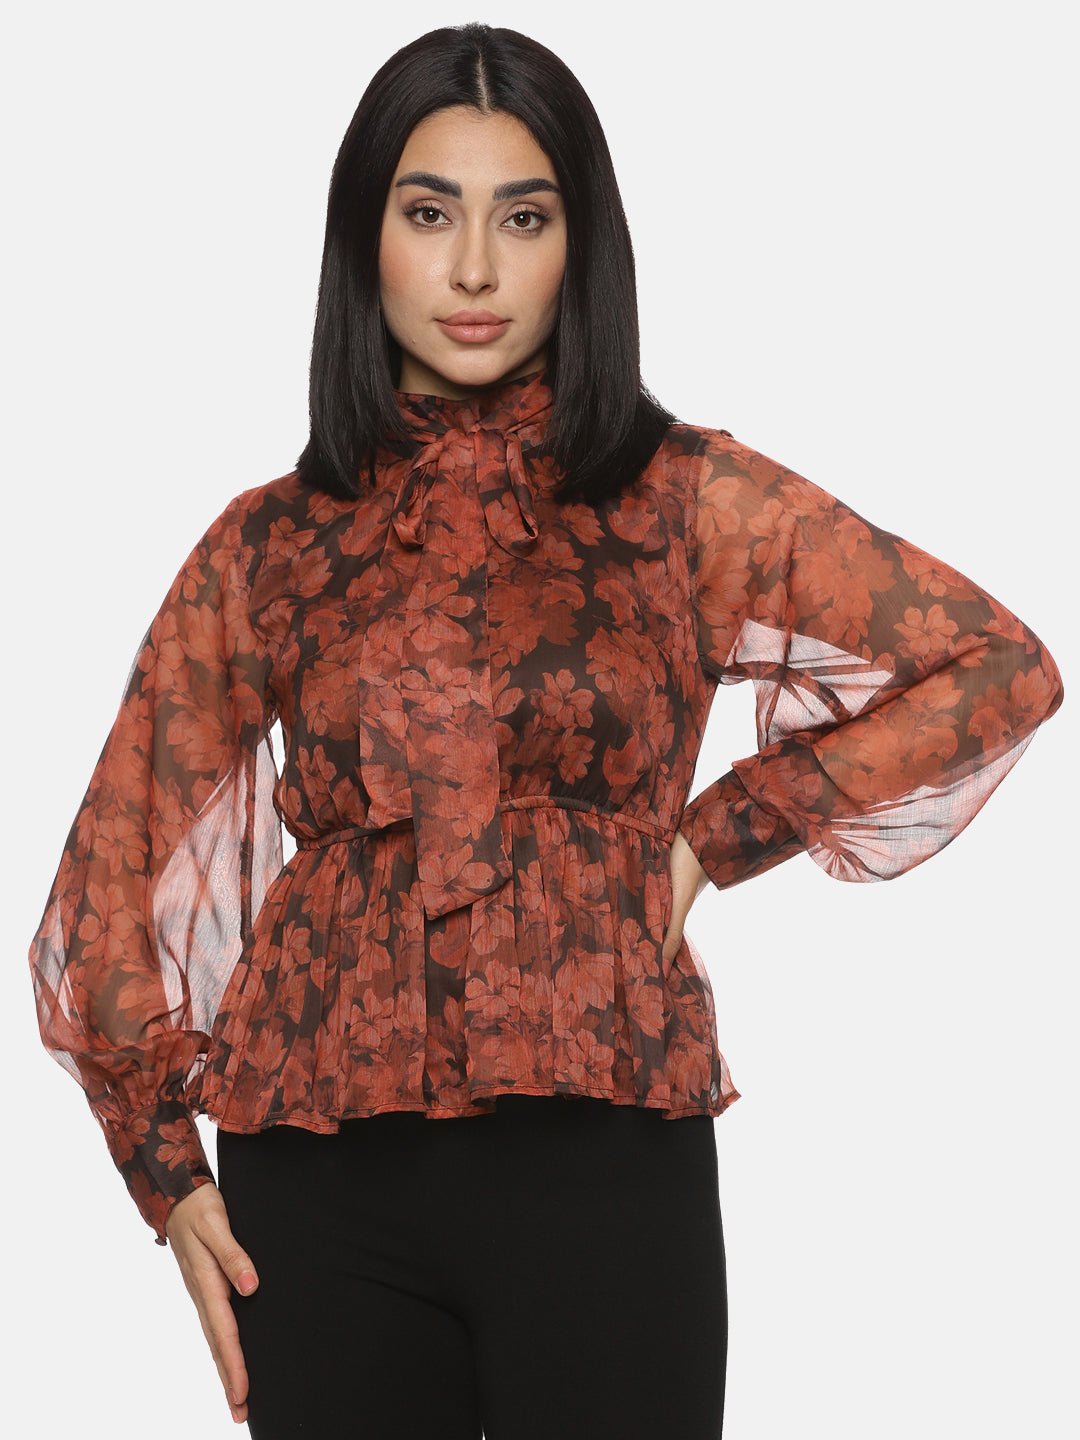 Buy Floral Brown Front Tie Knot Peplum Top For Women at Best Price